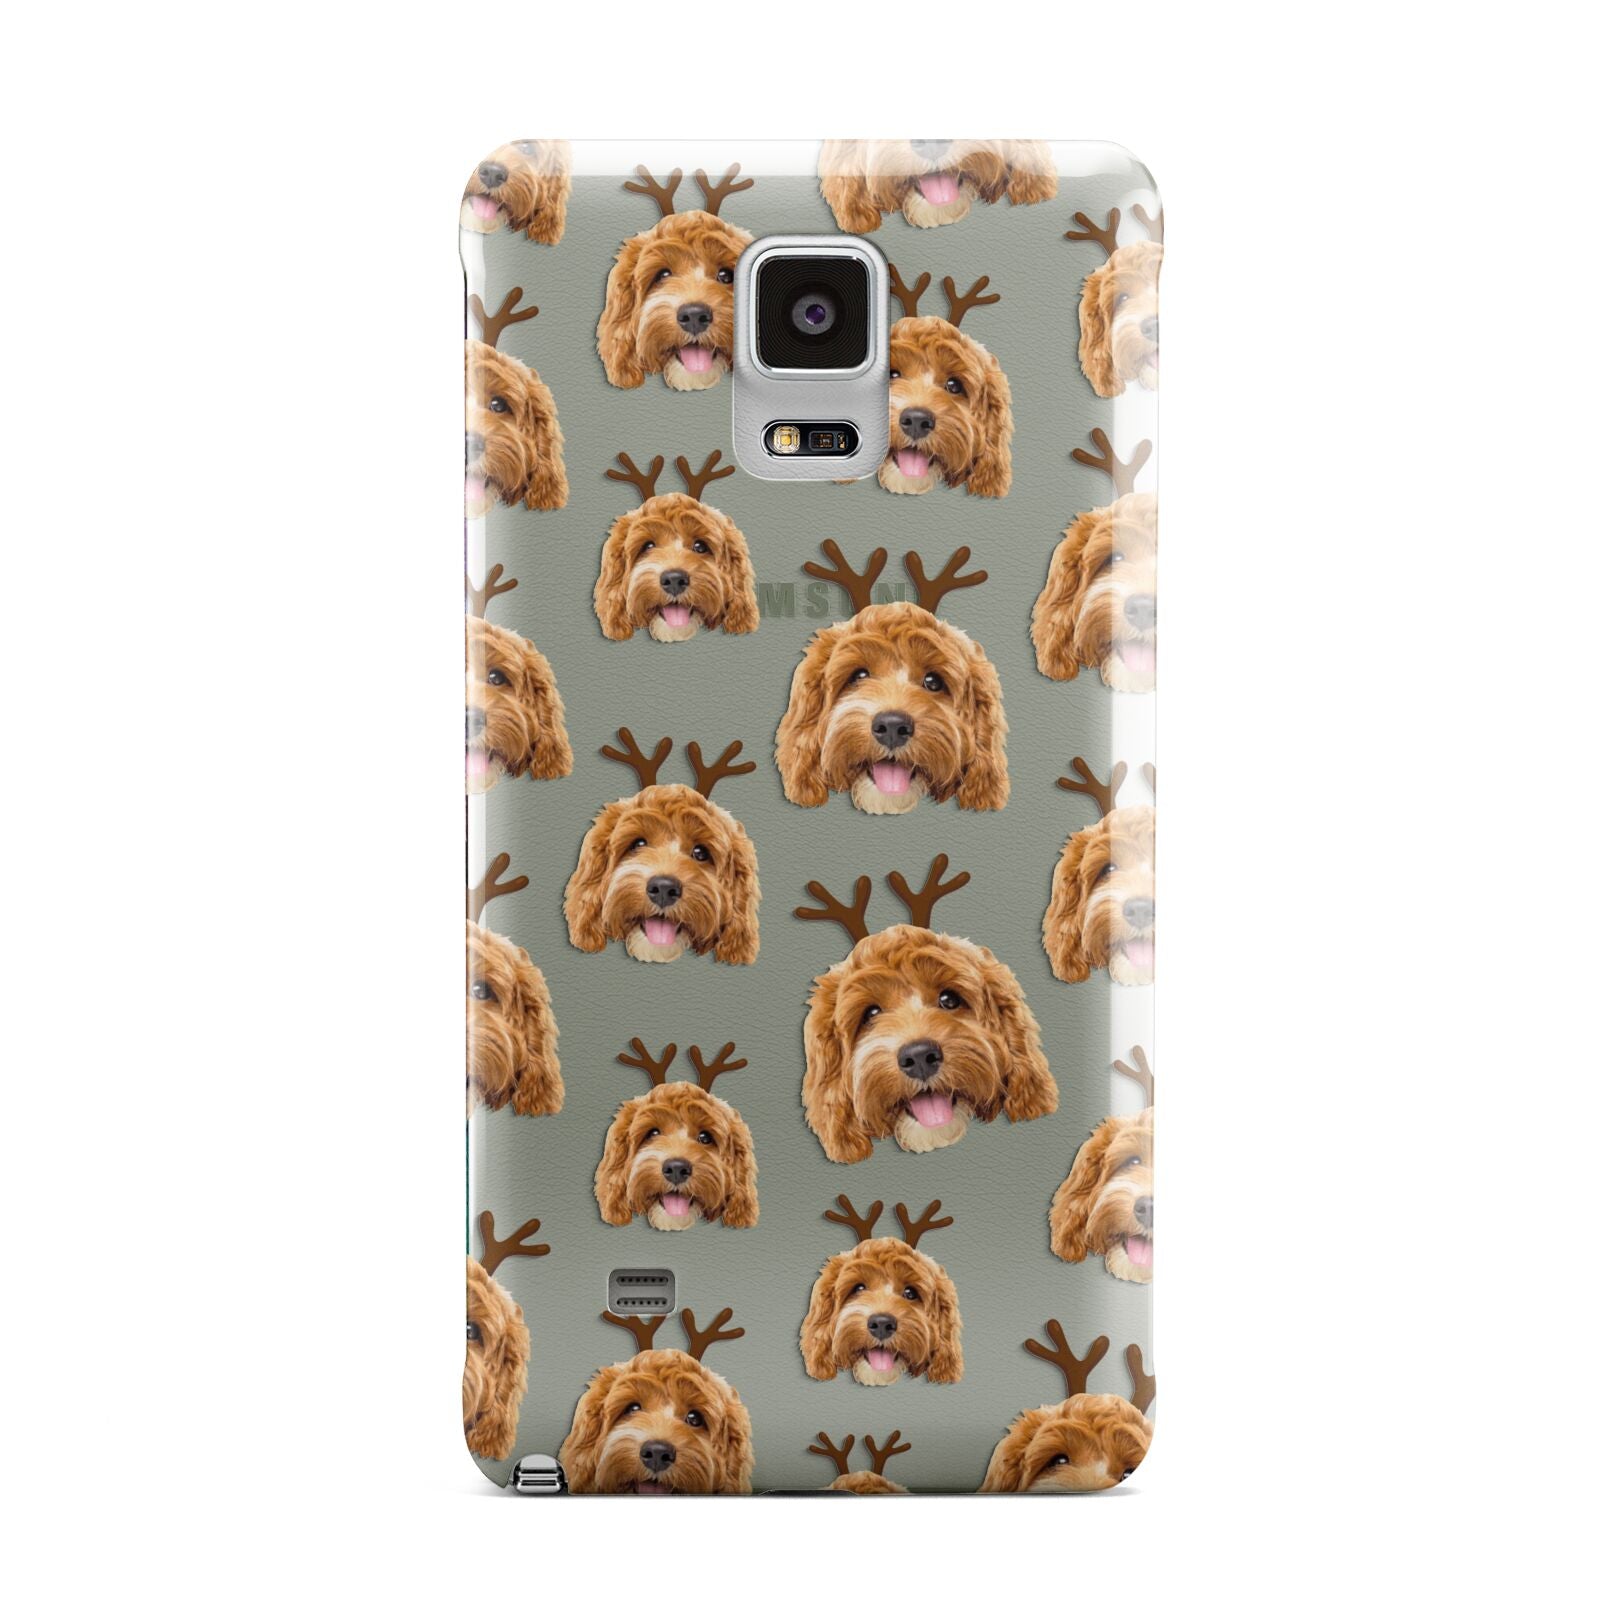 Personalised Christmas Dog Antler Samsung Galaxy Note 4 Case